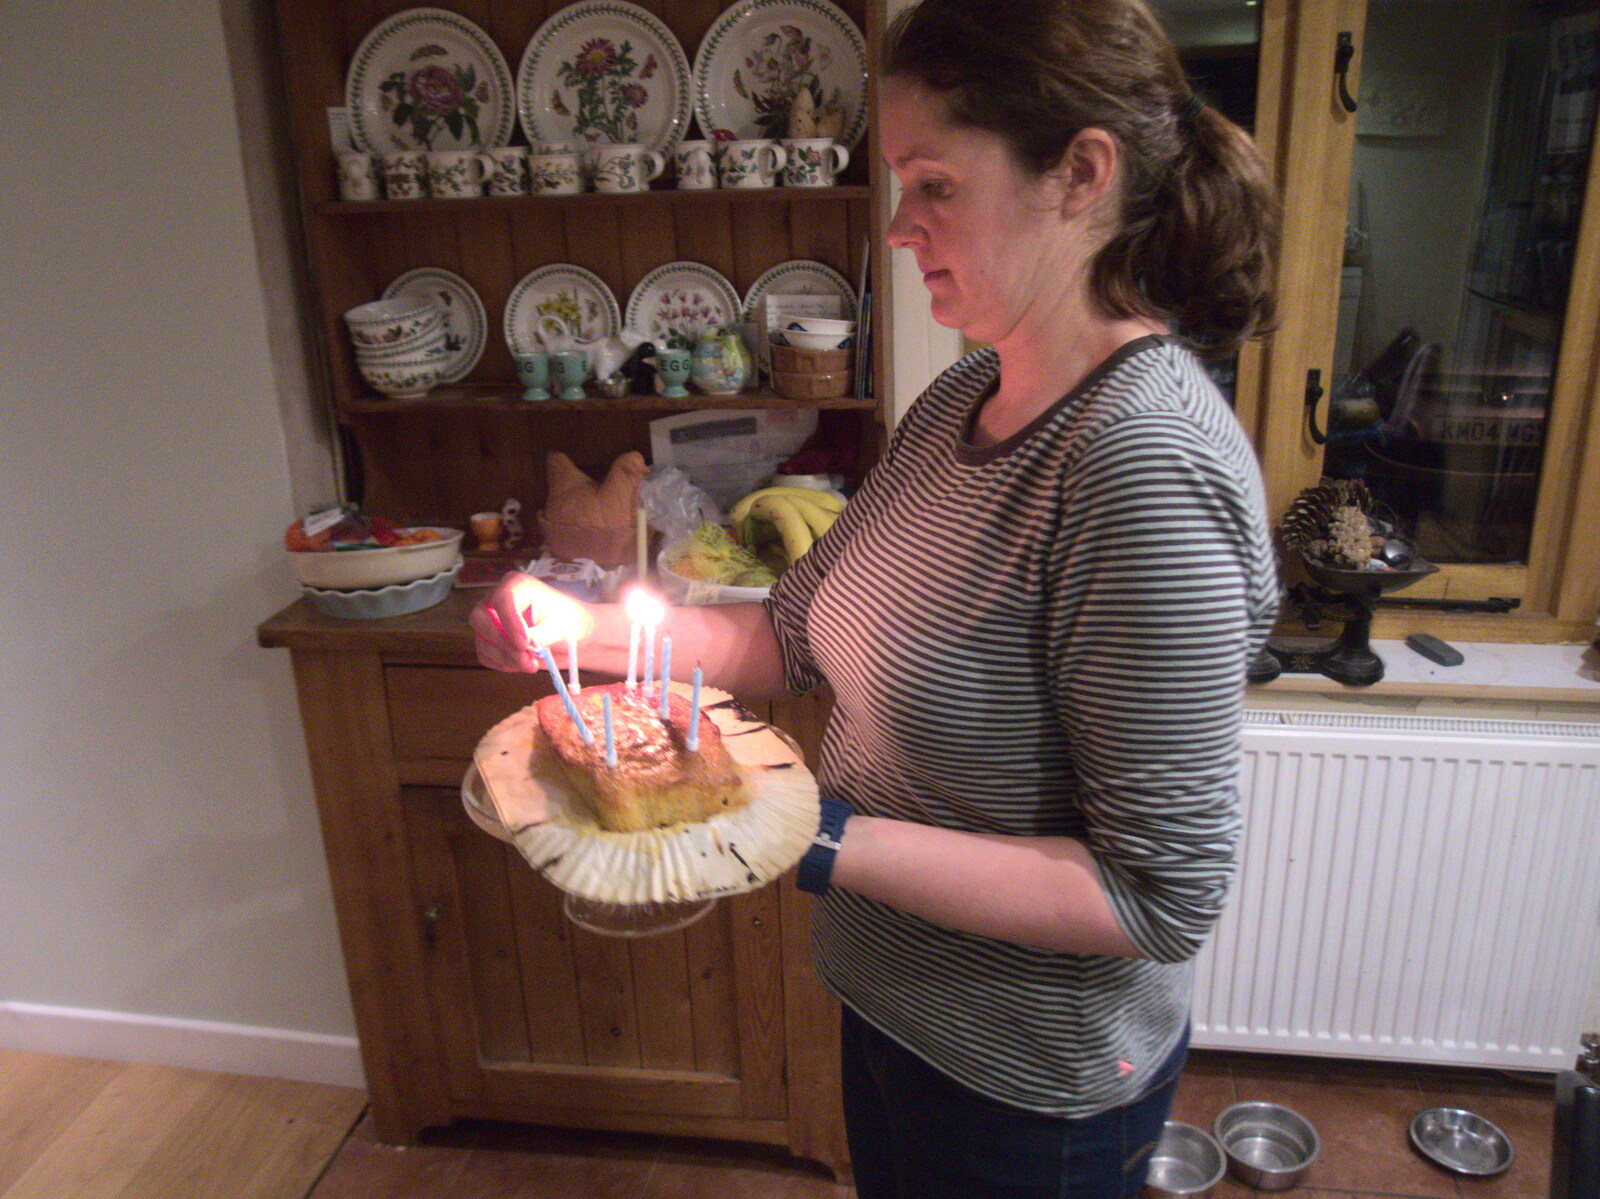 Isobel brings a cake out from The G-Unit's Birthday, Brome, Suffolk - 20th January 2019